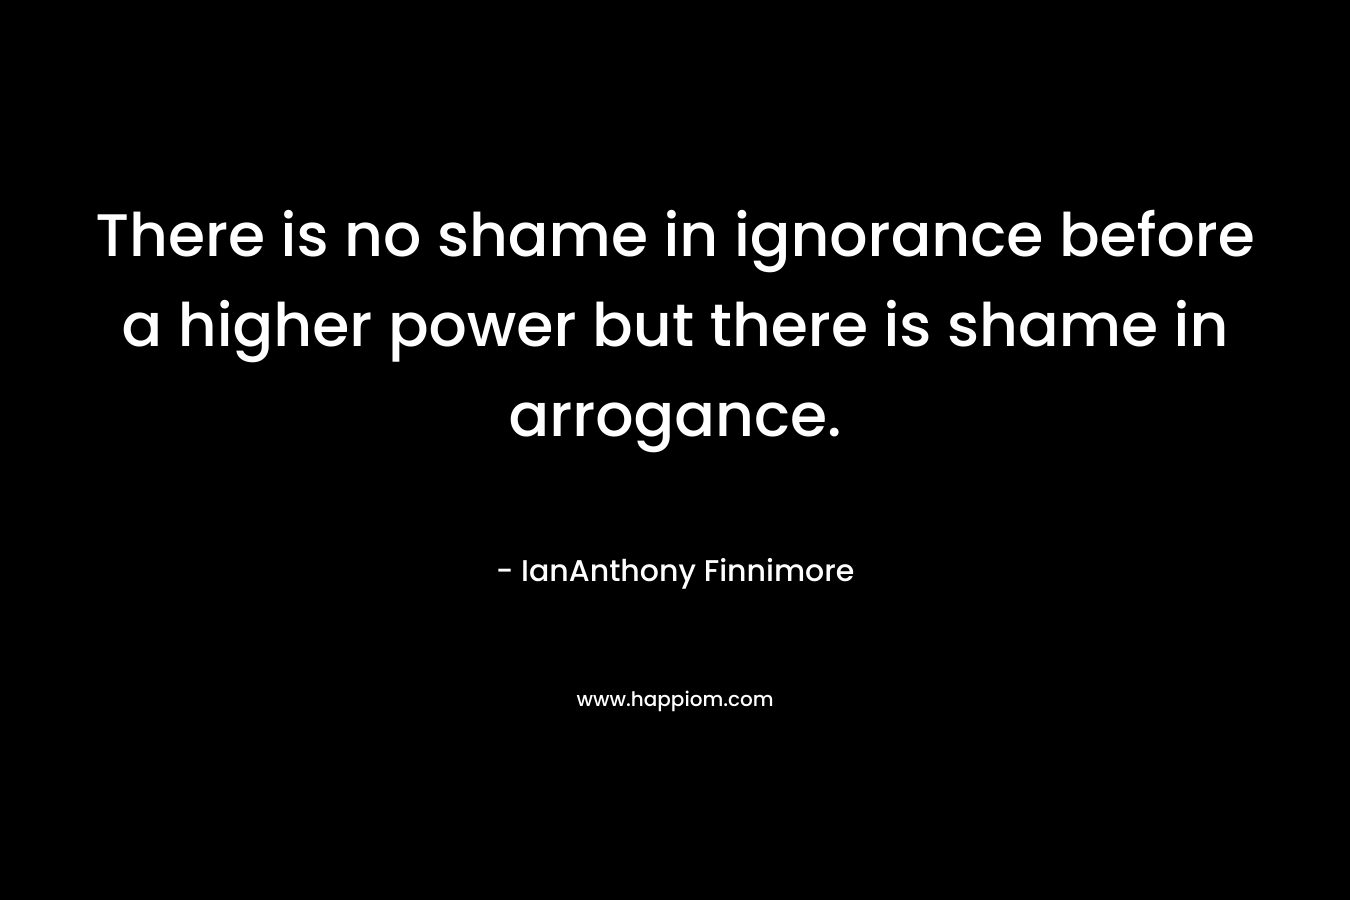 There is no shame in ignorance before a higher power but there is shame in arrogance.